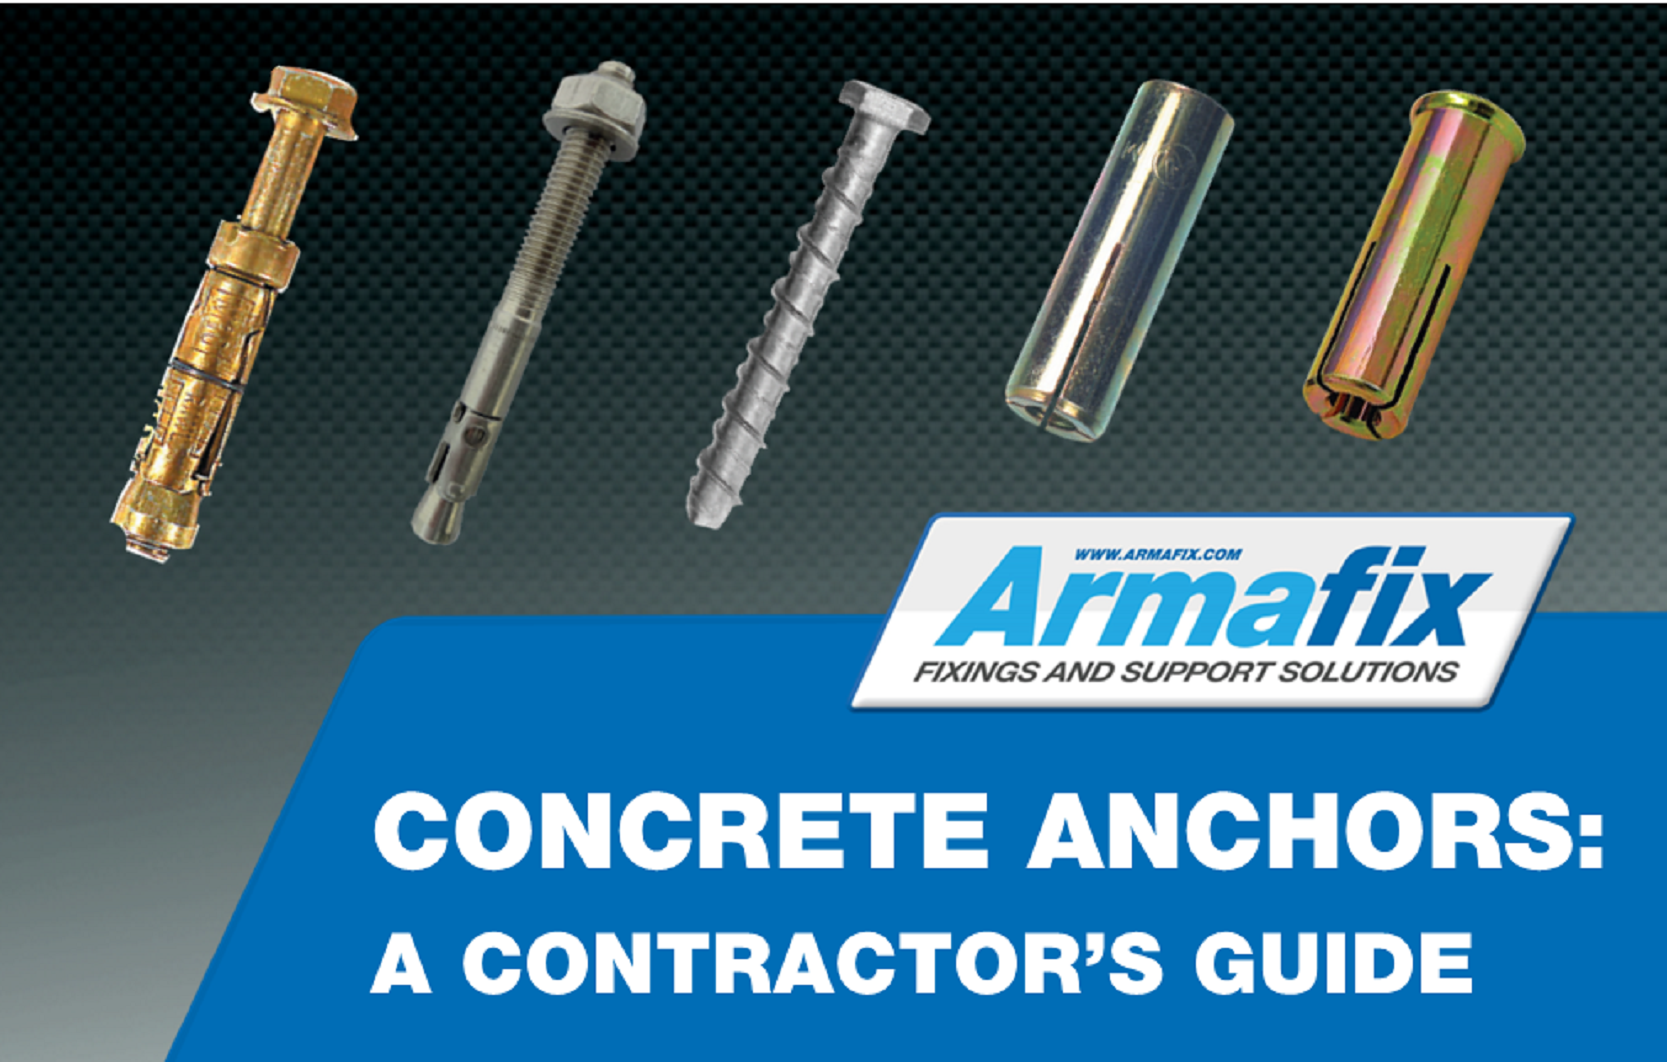 What Kind of Concrete Anchors Do I Need and Why?